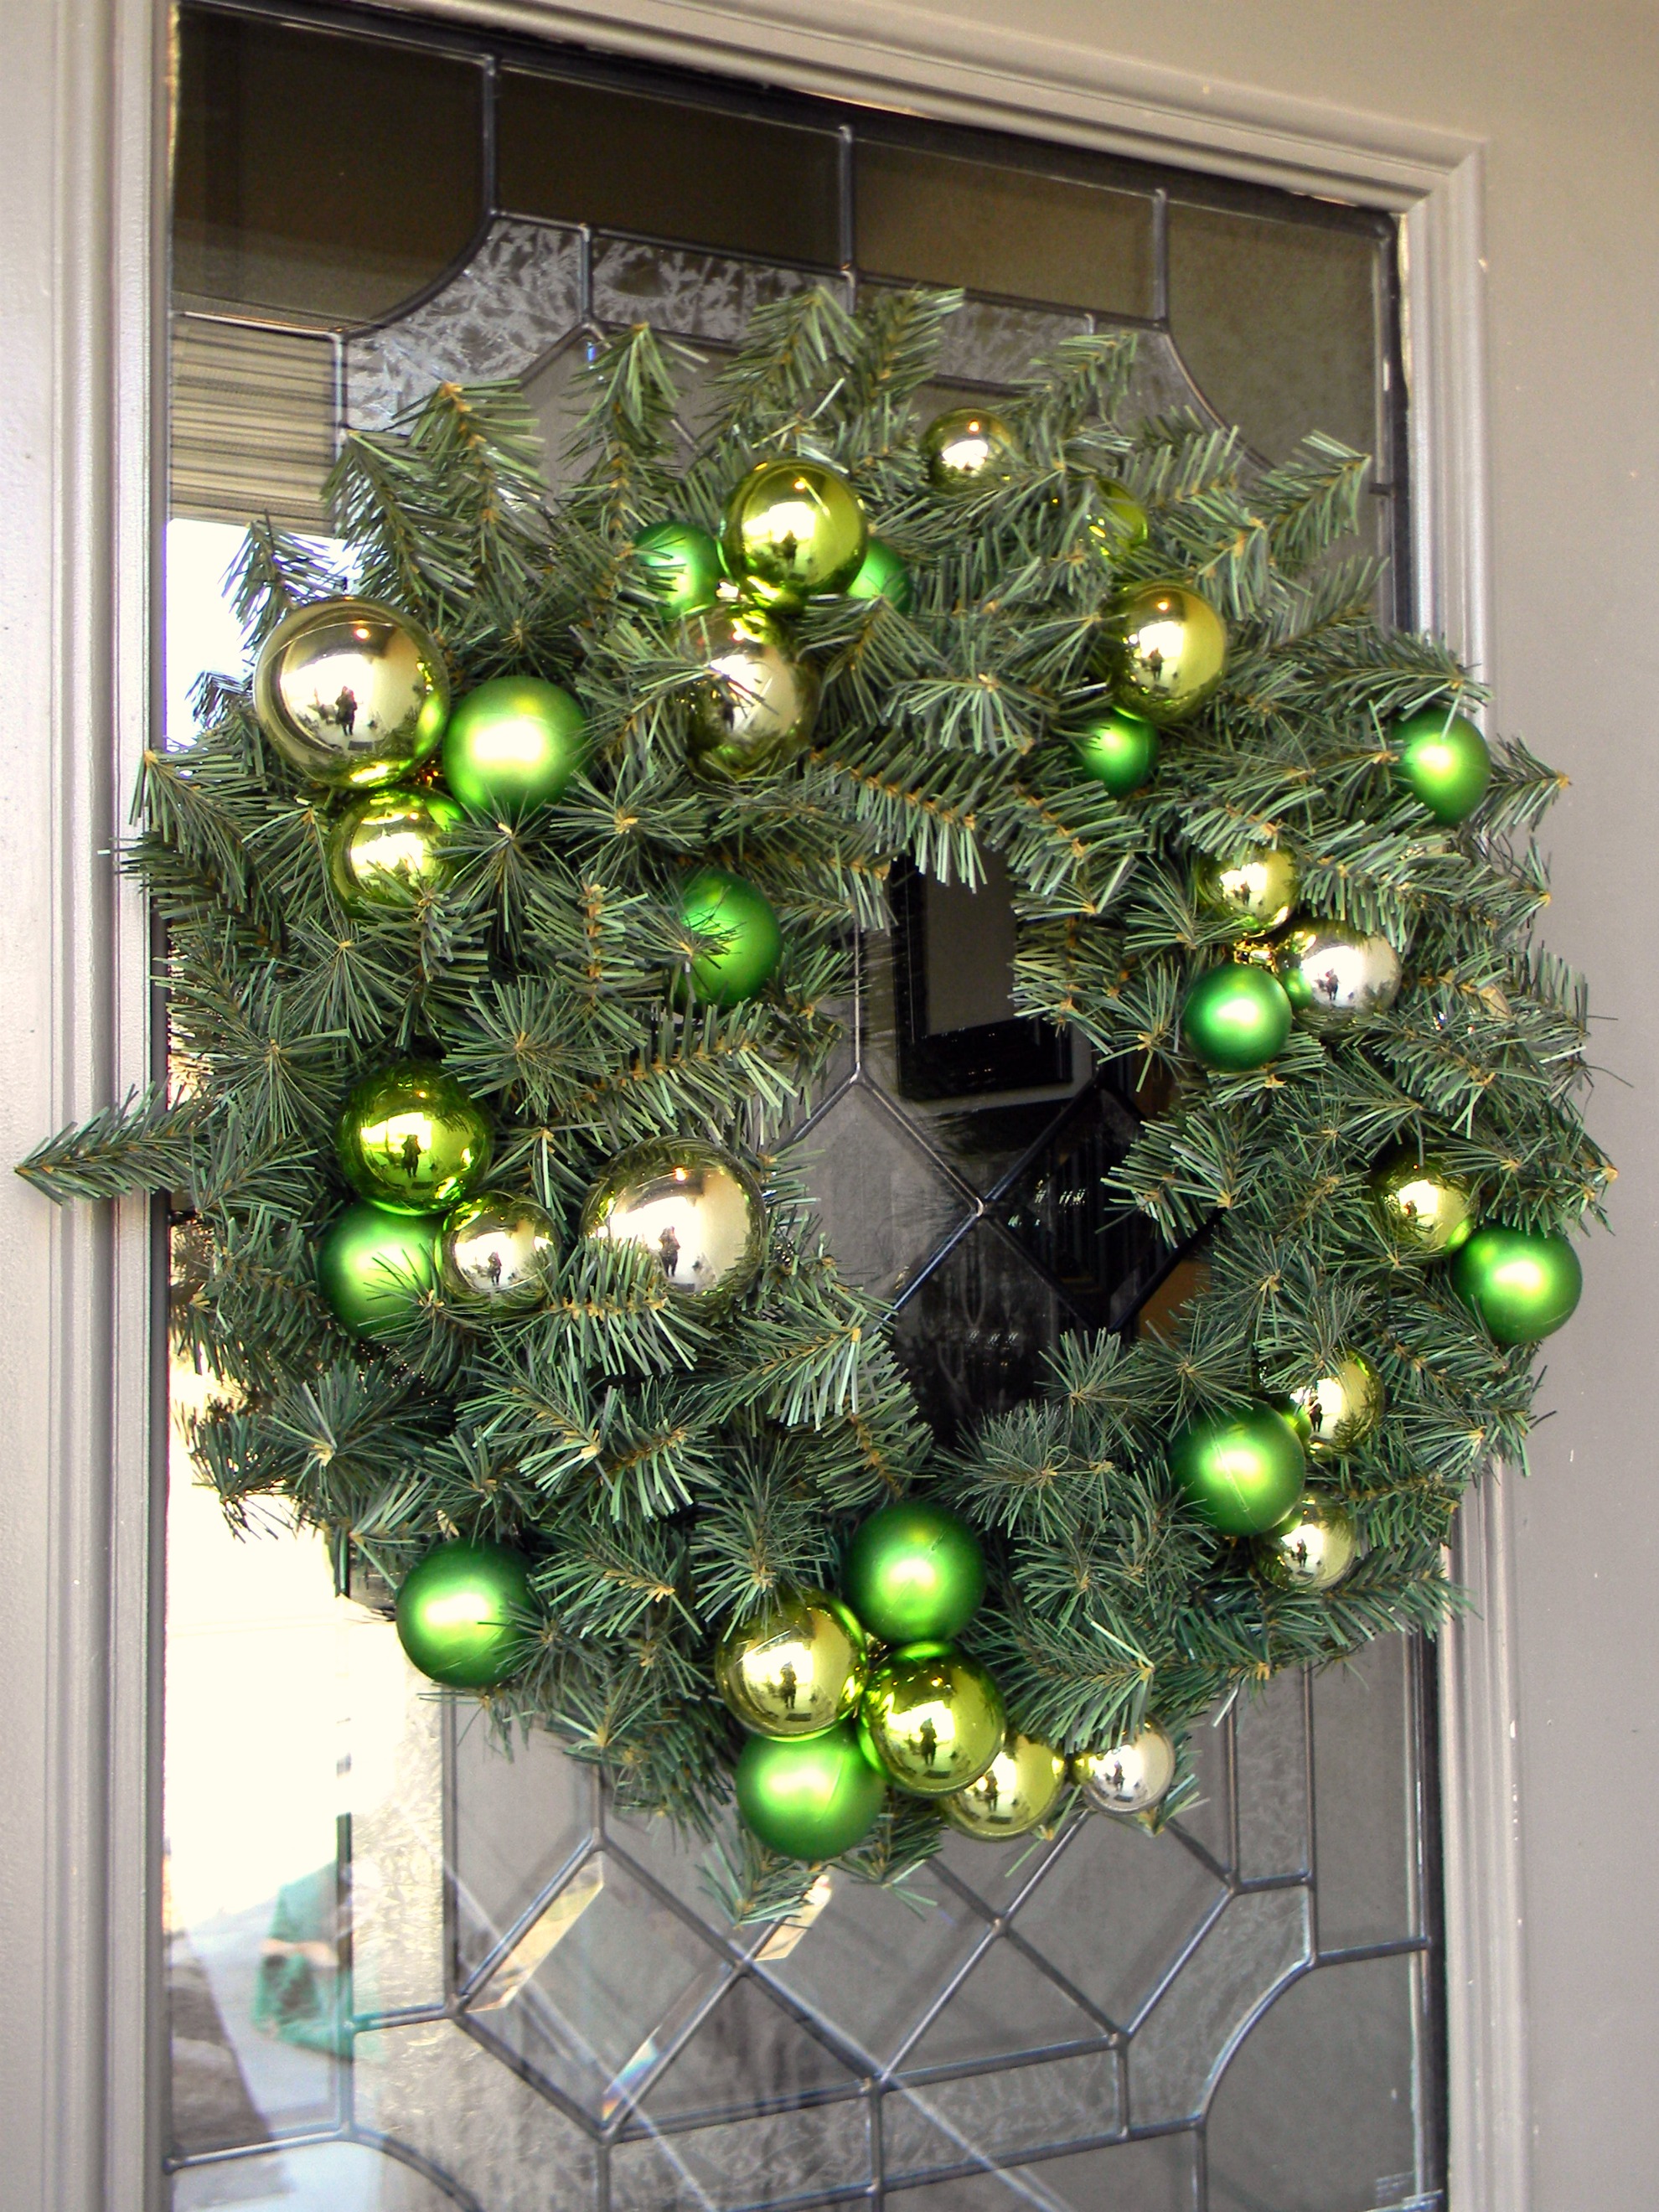 Natural/Outdoorsy/Woodsy Christmas Decor - Organize and 